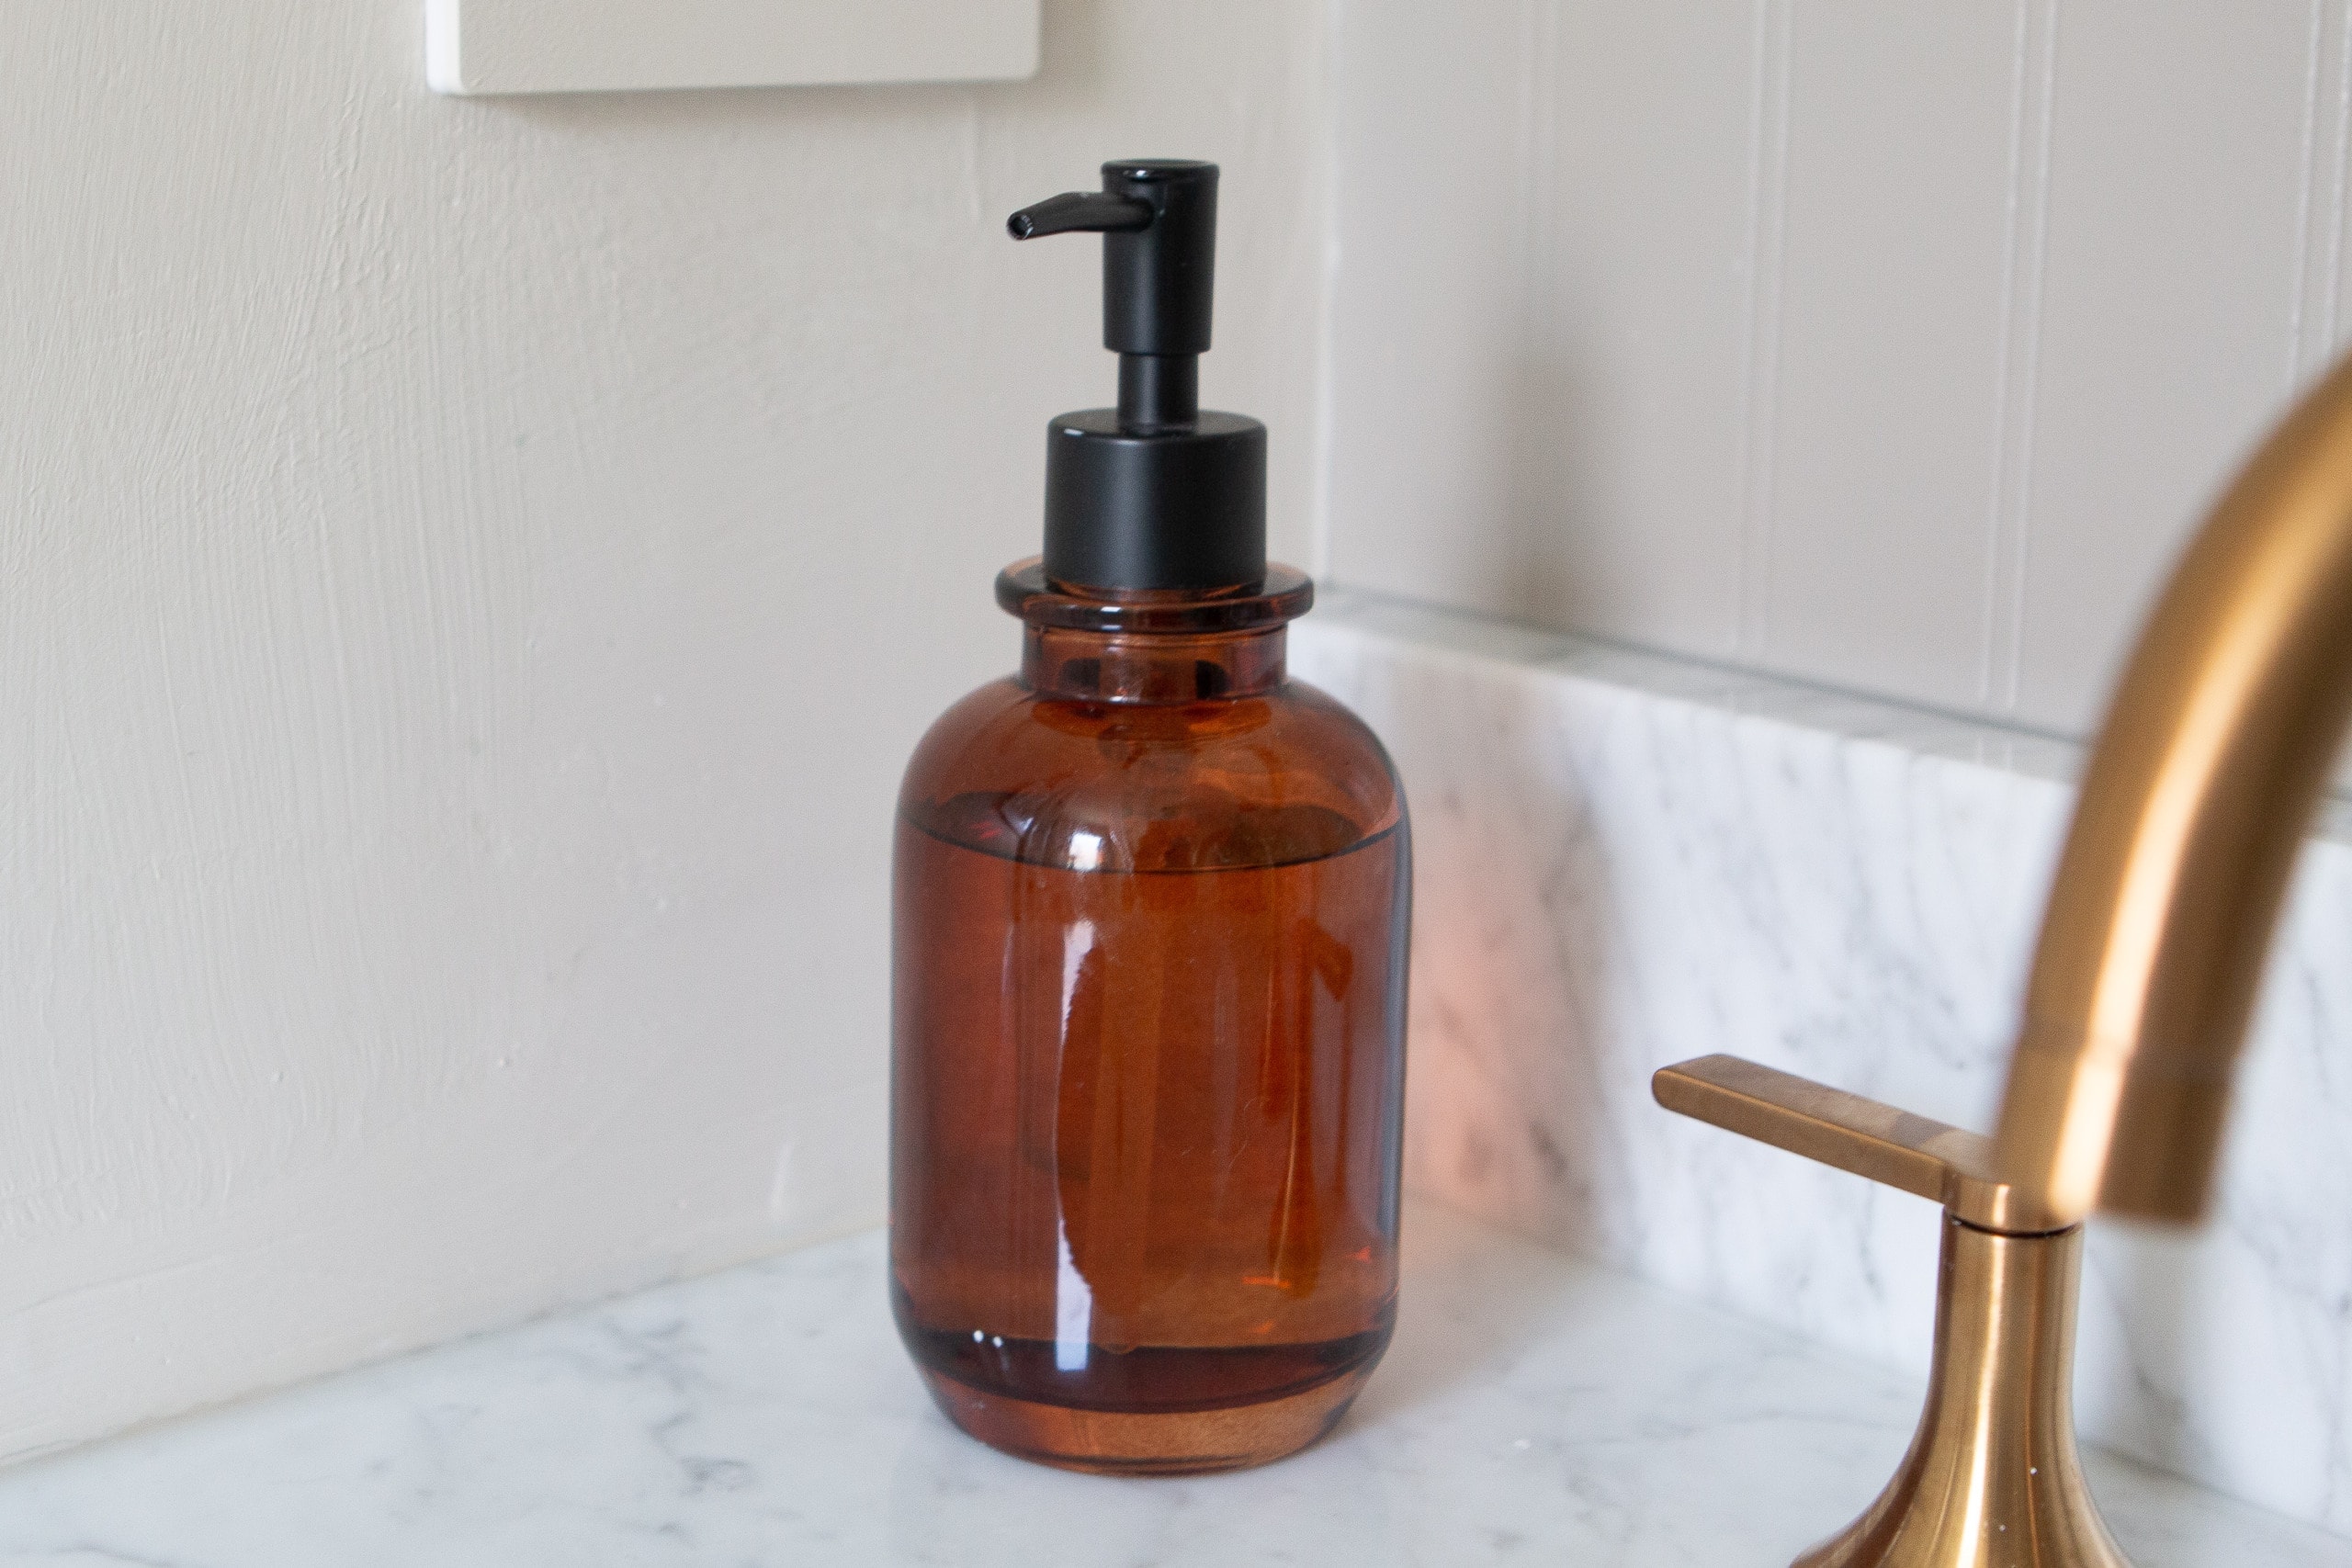 Using an amber colored soap dispenser for my bathroom decor ideas